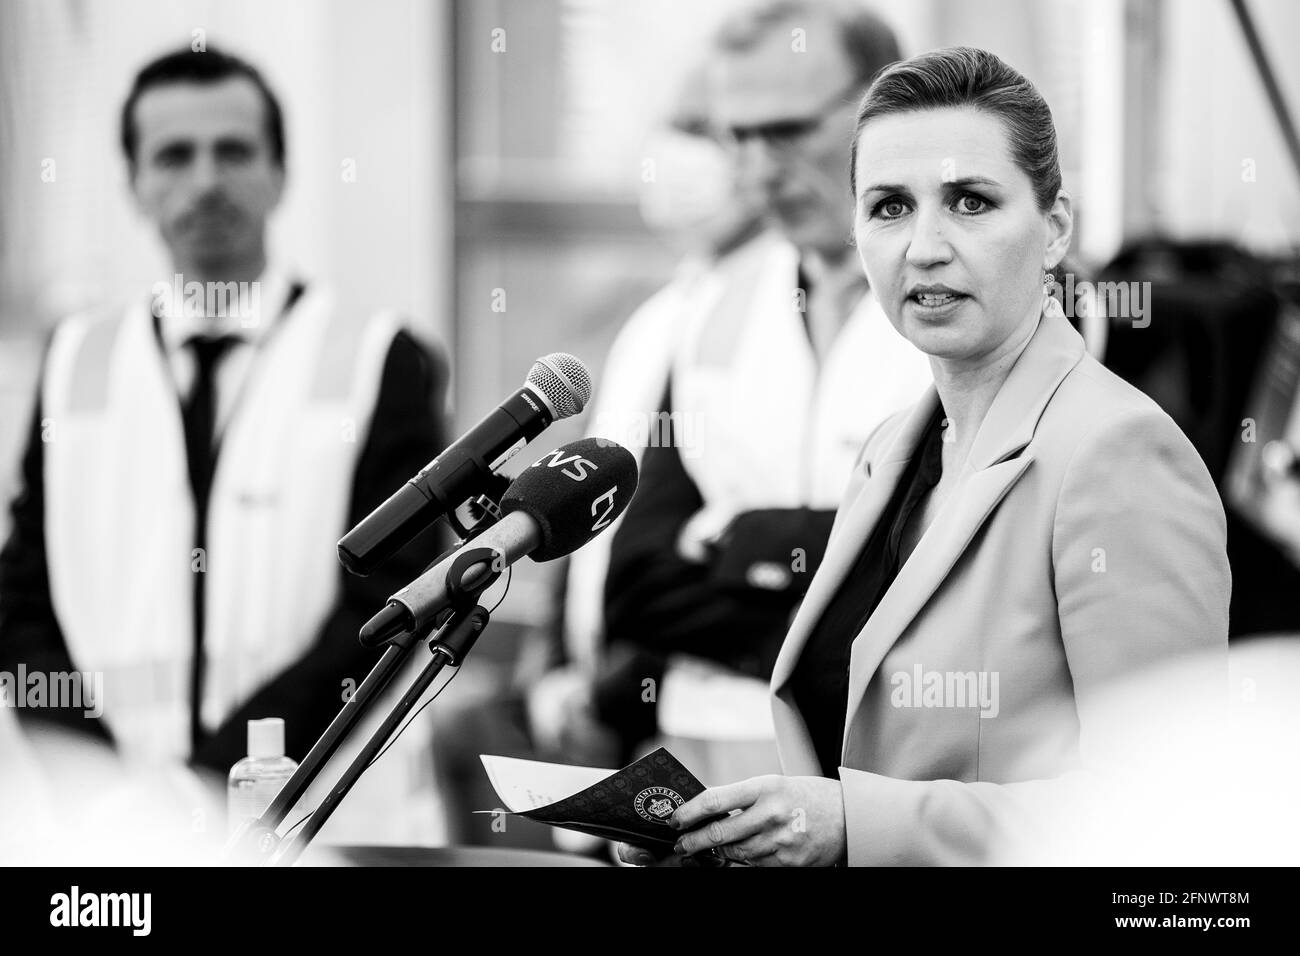 Fredericia, Denmark. 06th, May 2021. Mette Frederiksen, Prime Minister of Denmark, seen at an event at the Carlsberg Brewery in Fredericia. (Photo credit: Gonzales Photo - Lasse Lagoni). Stock Photo